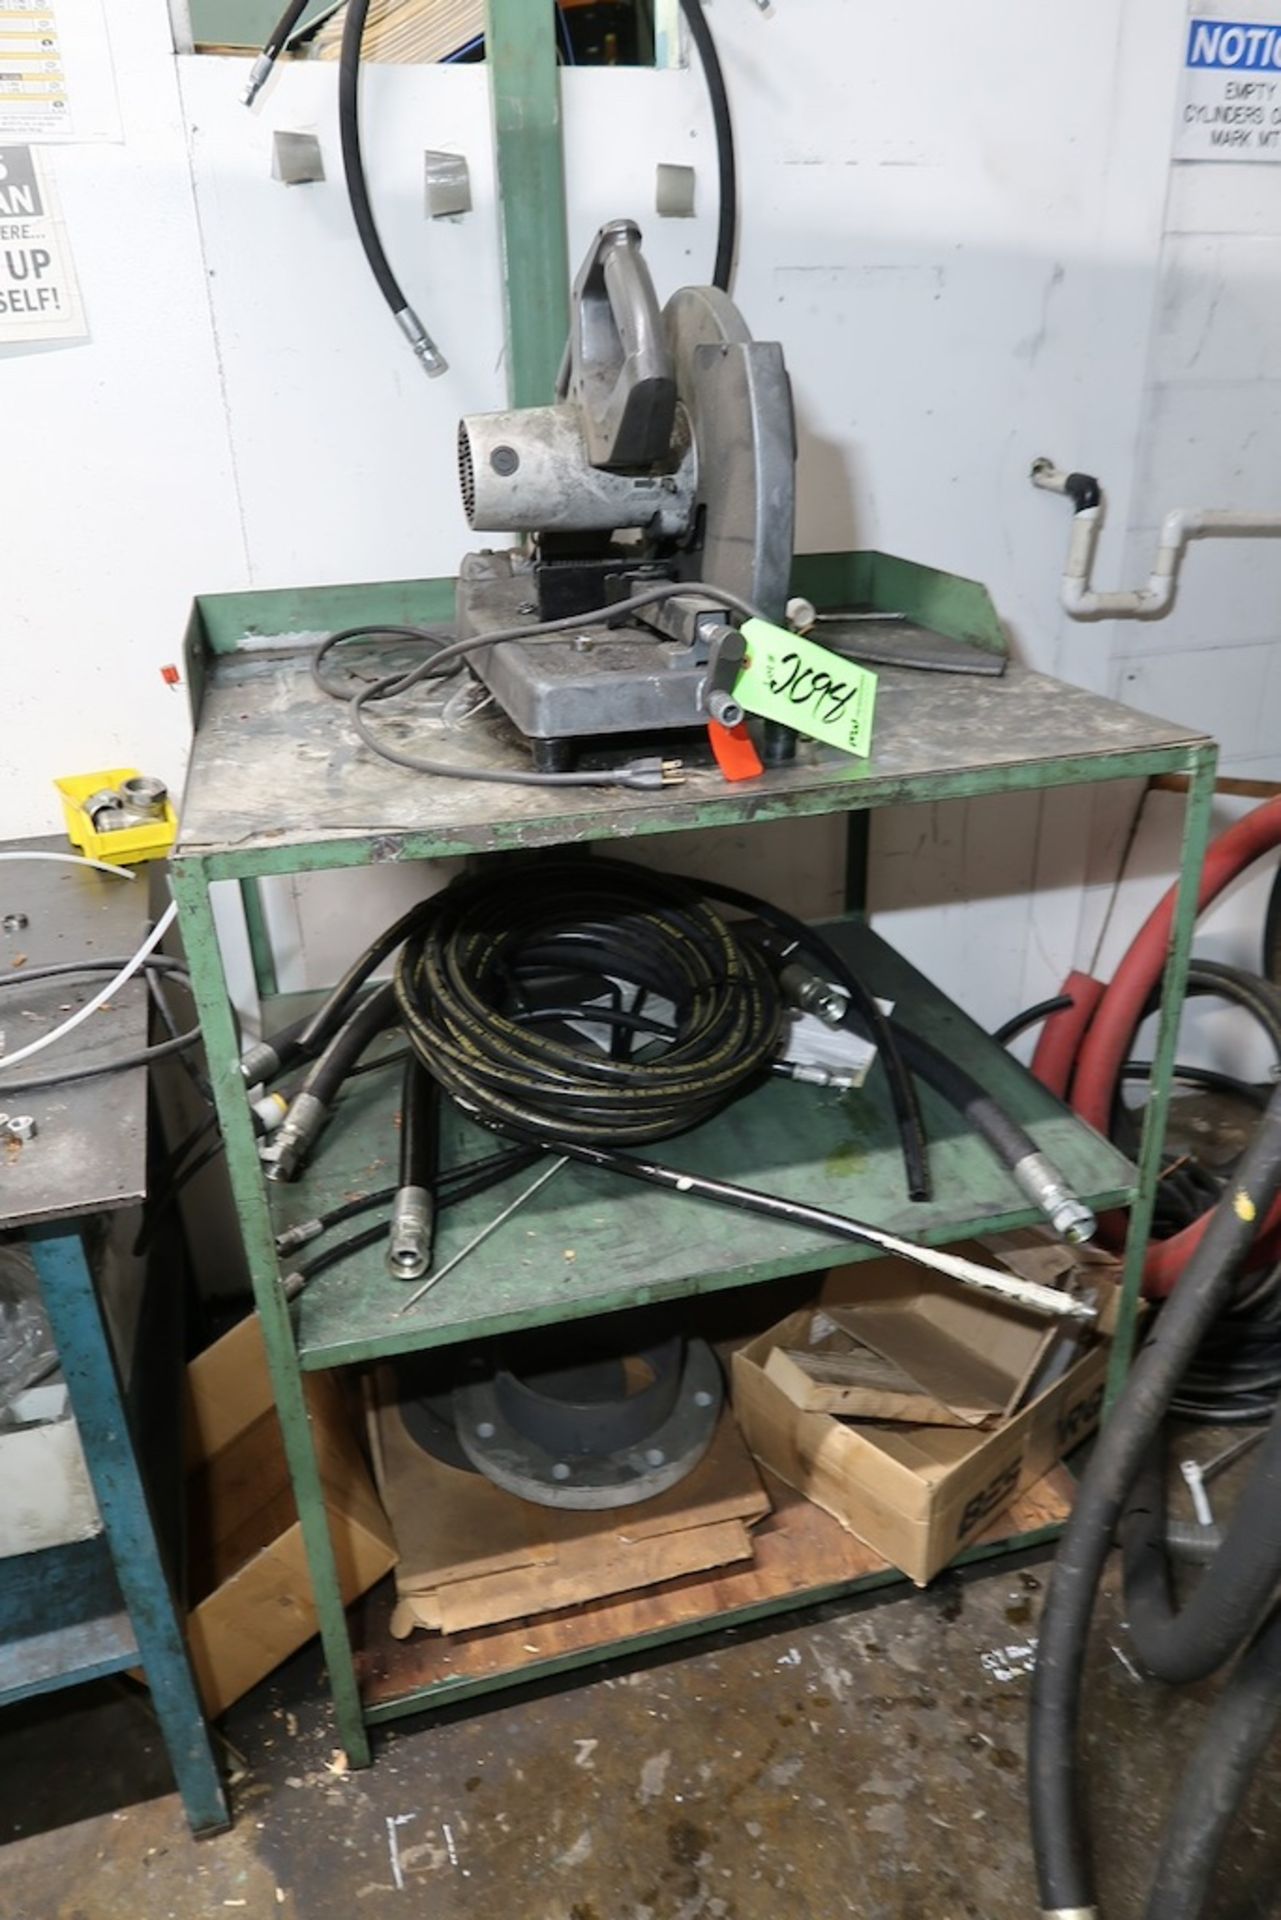 Hydraulic Tube Bender, Crimper, (2) Cut Off Saws and Steel Wokbench w/Vise - Image 8 of 10